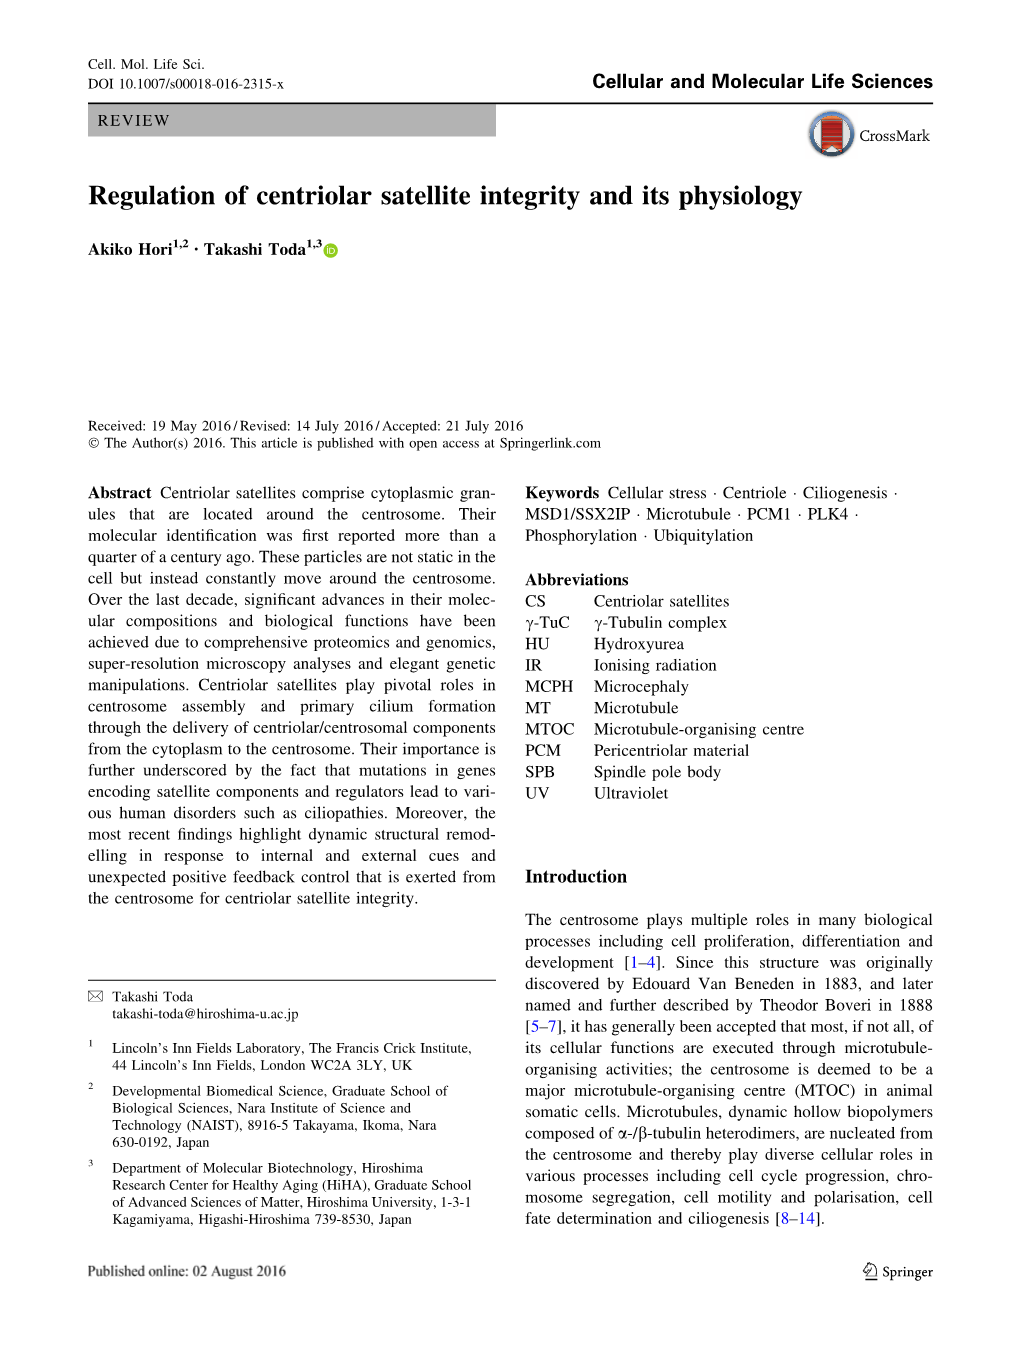 Regulation of Centriolar Satellite Integrity and Its Physiology